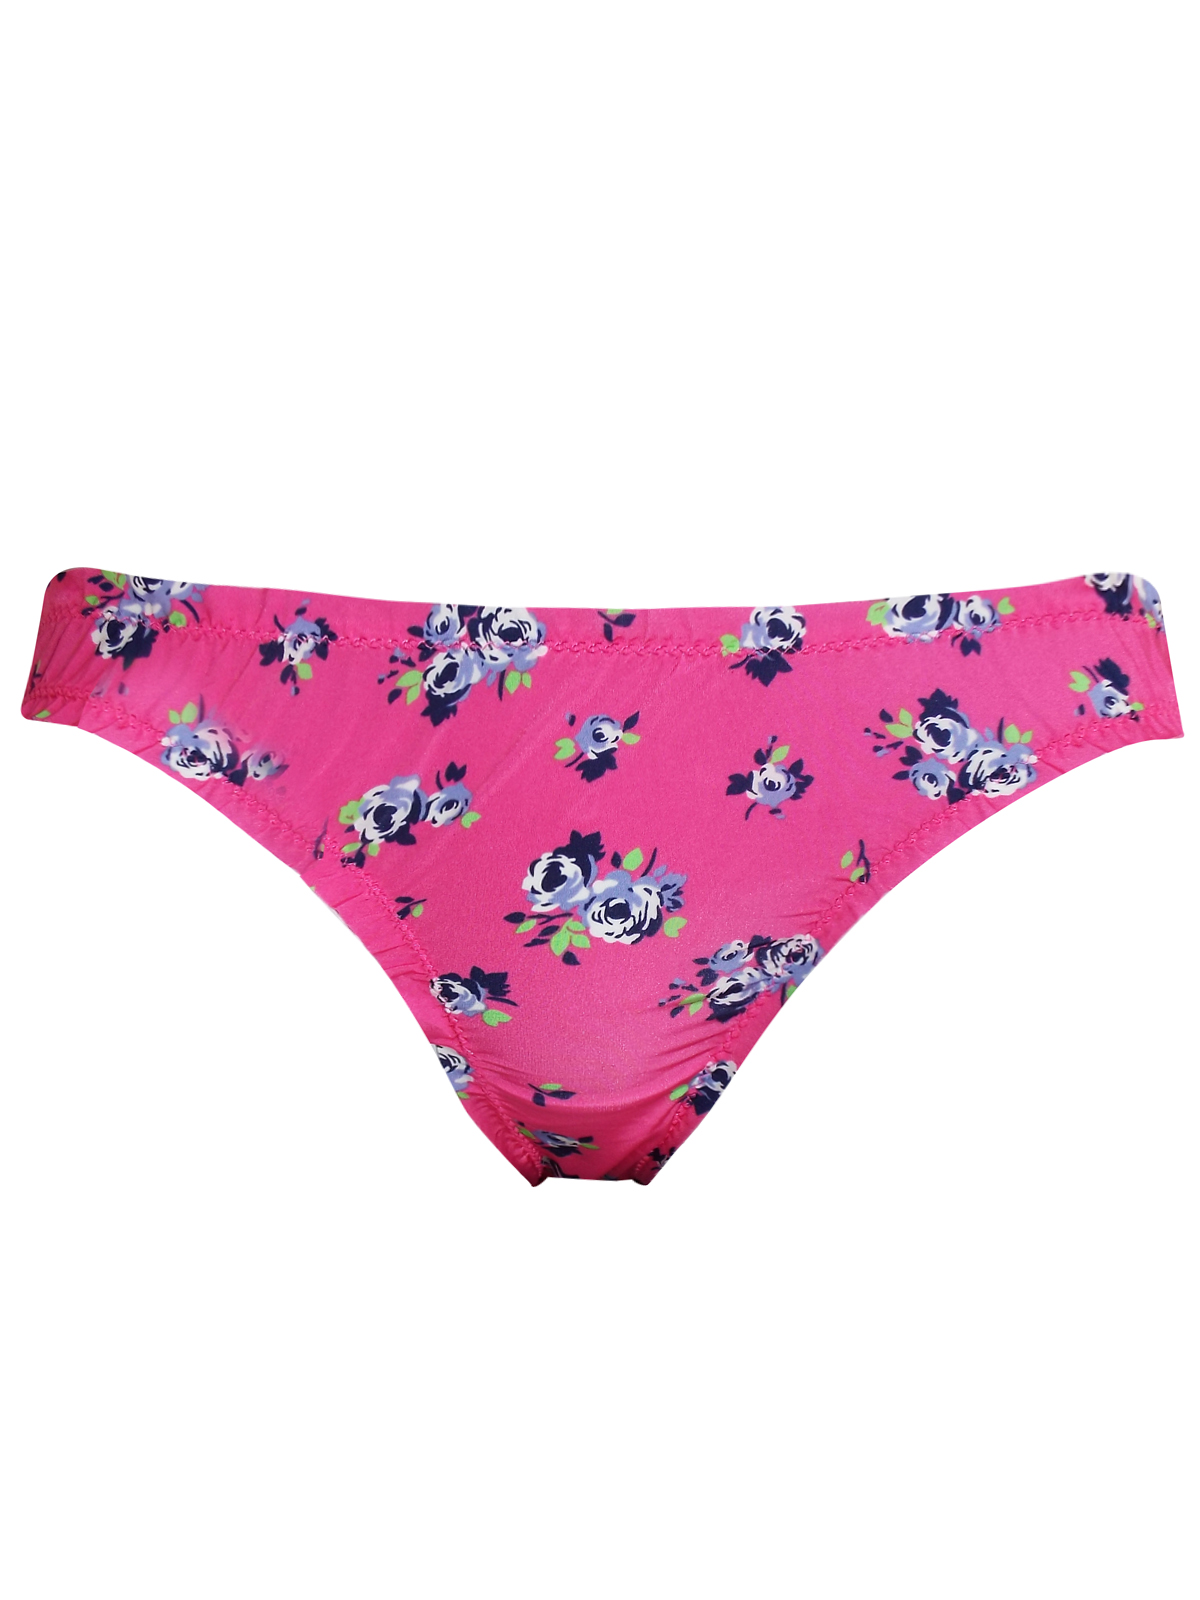 Marks and Spencer - - M&5 PINK Low Rise Floral Bikini Knickers - Size 8 ...